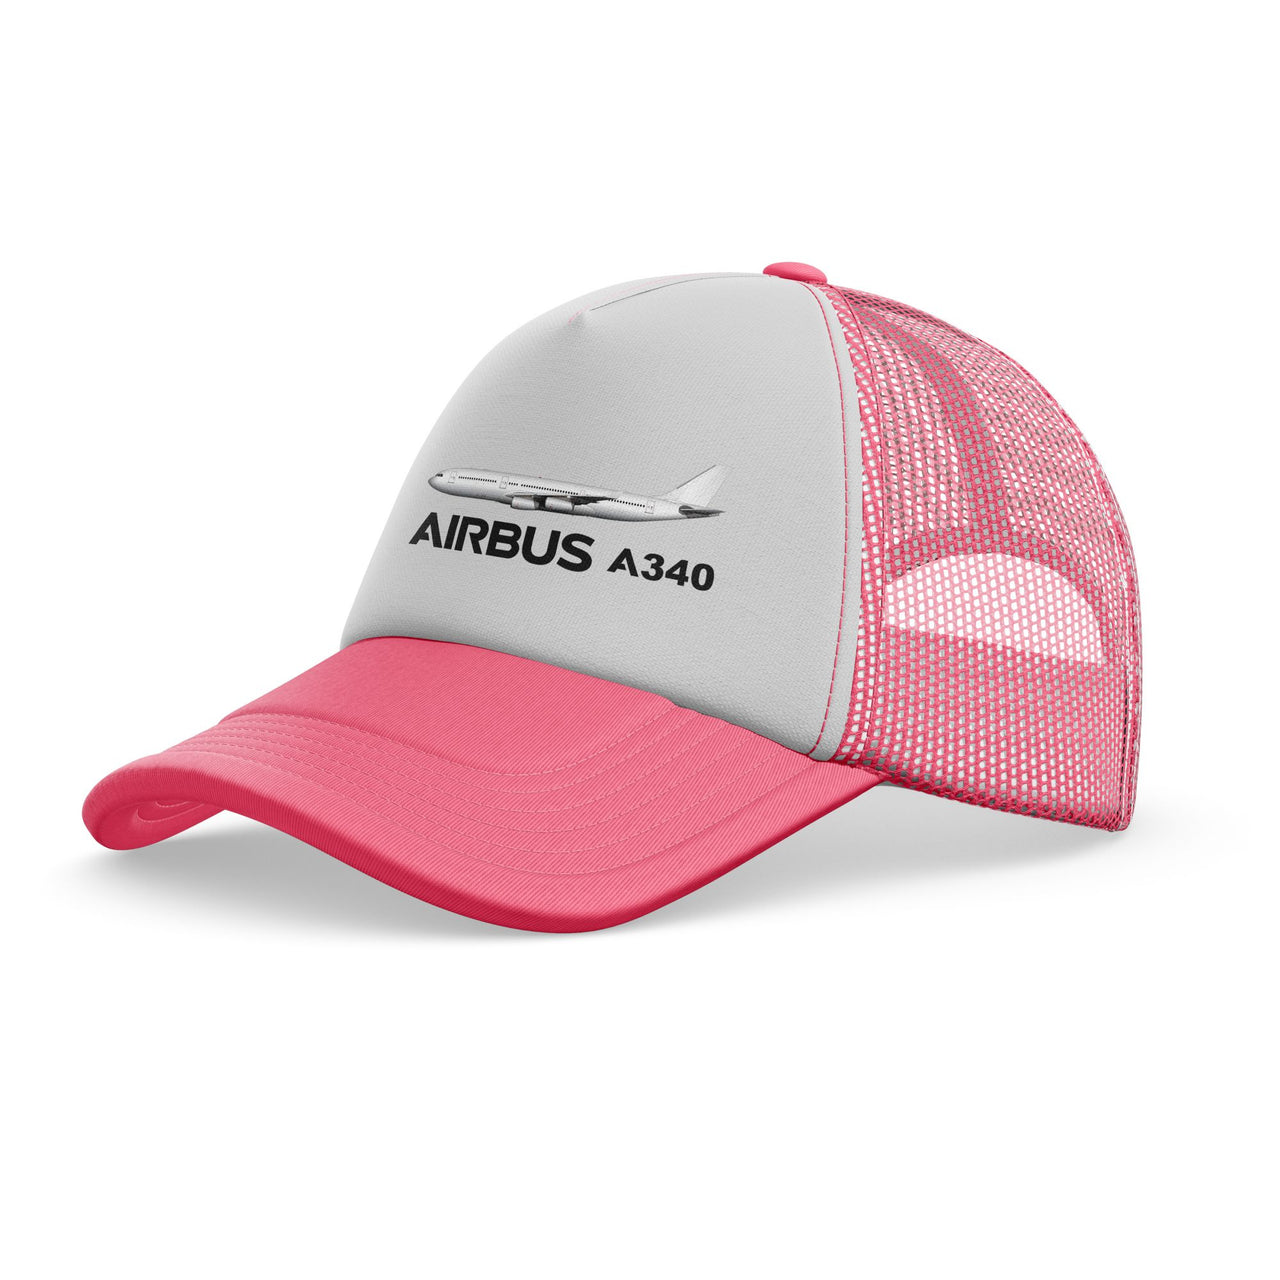 The Airbus A340 Designed Trucker Caps & Hats